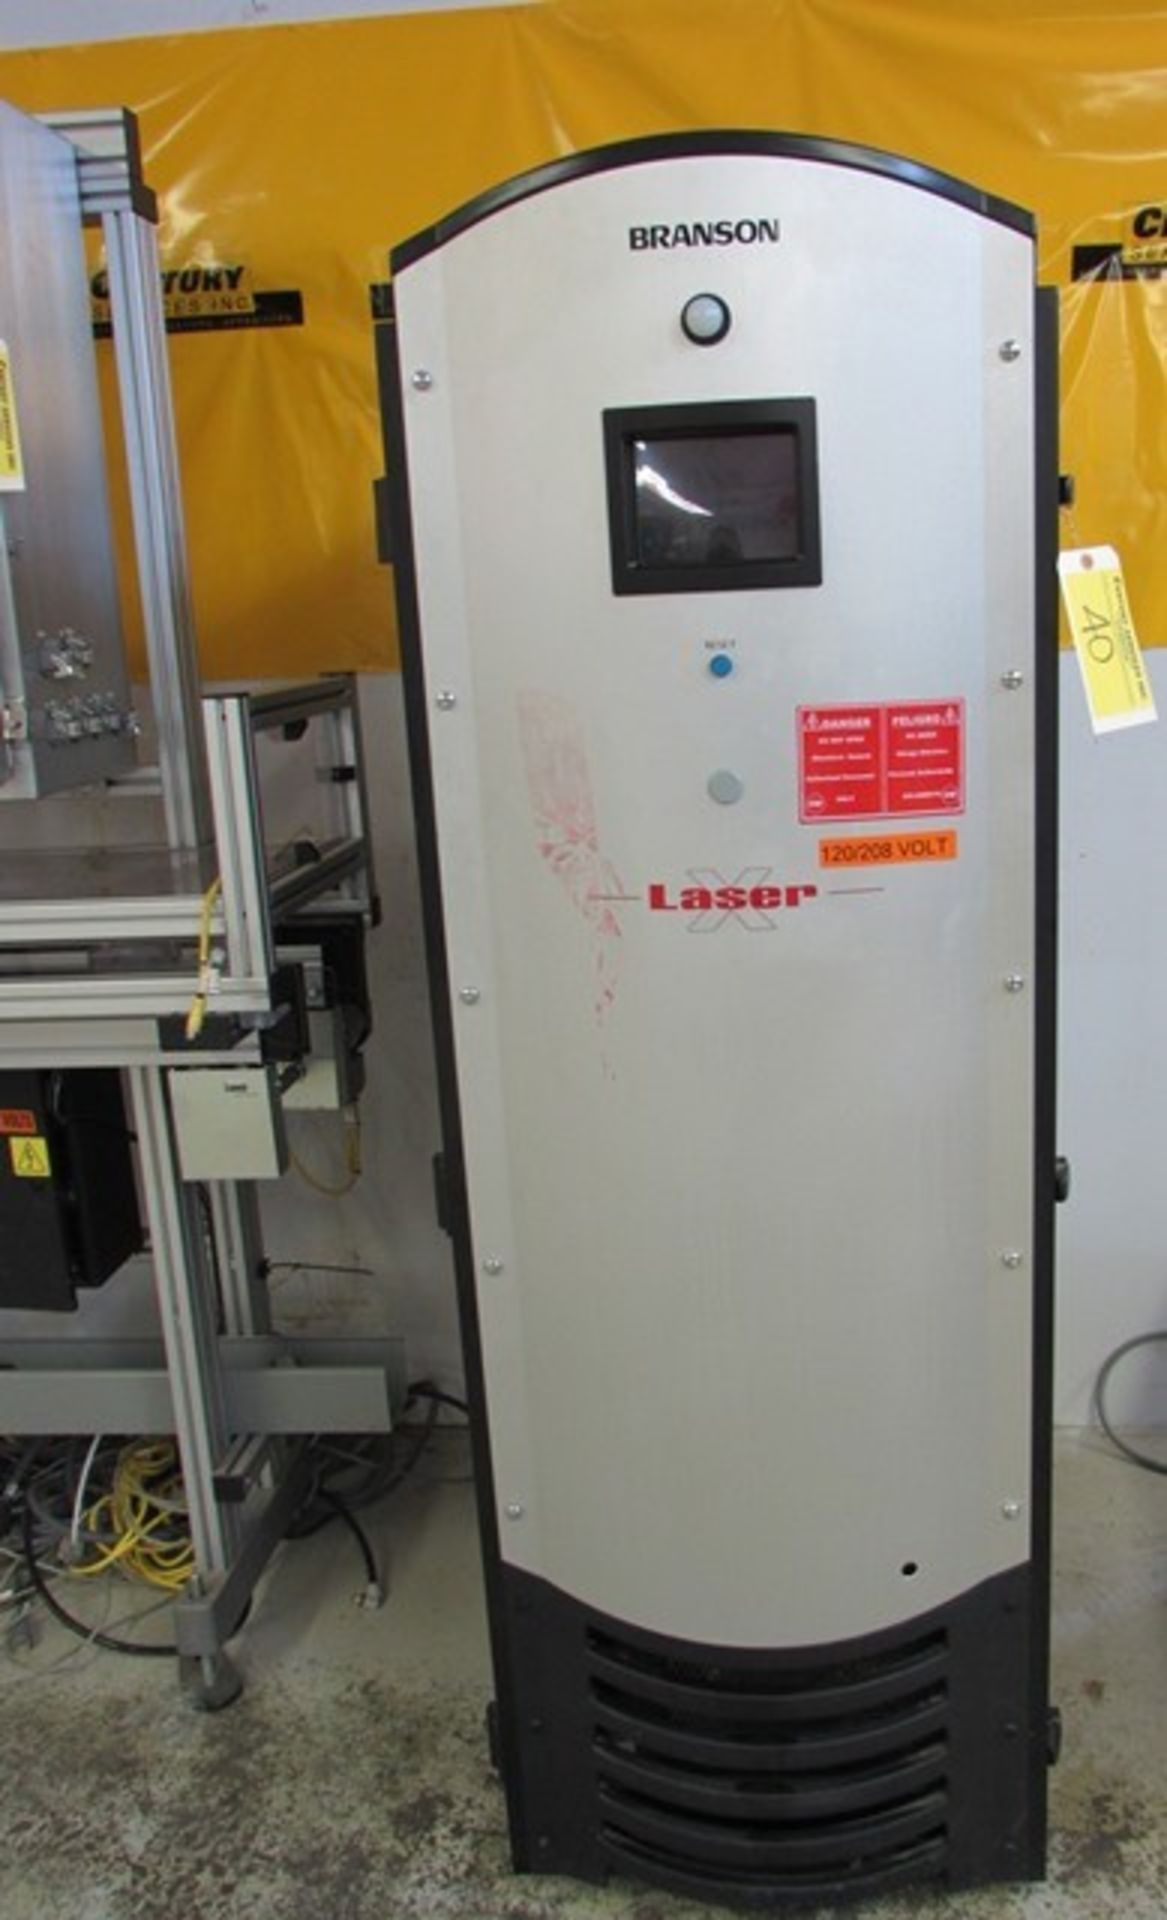 2011 Branson laser welding system equipment c/w  Radiance 3G bench-top controller with 2-laser - Image 5 of 13